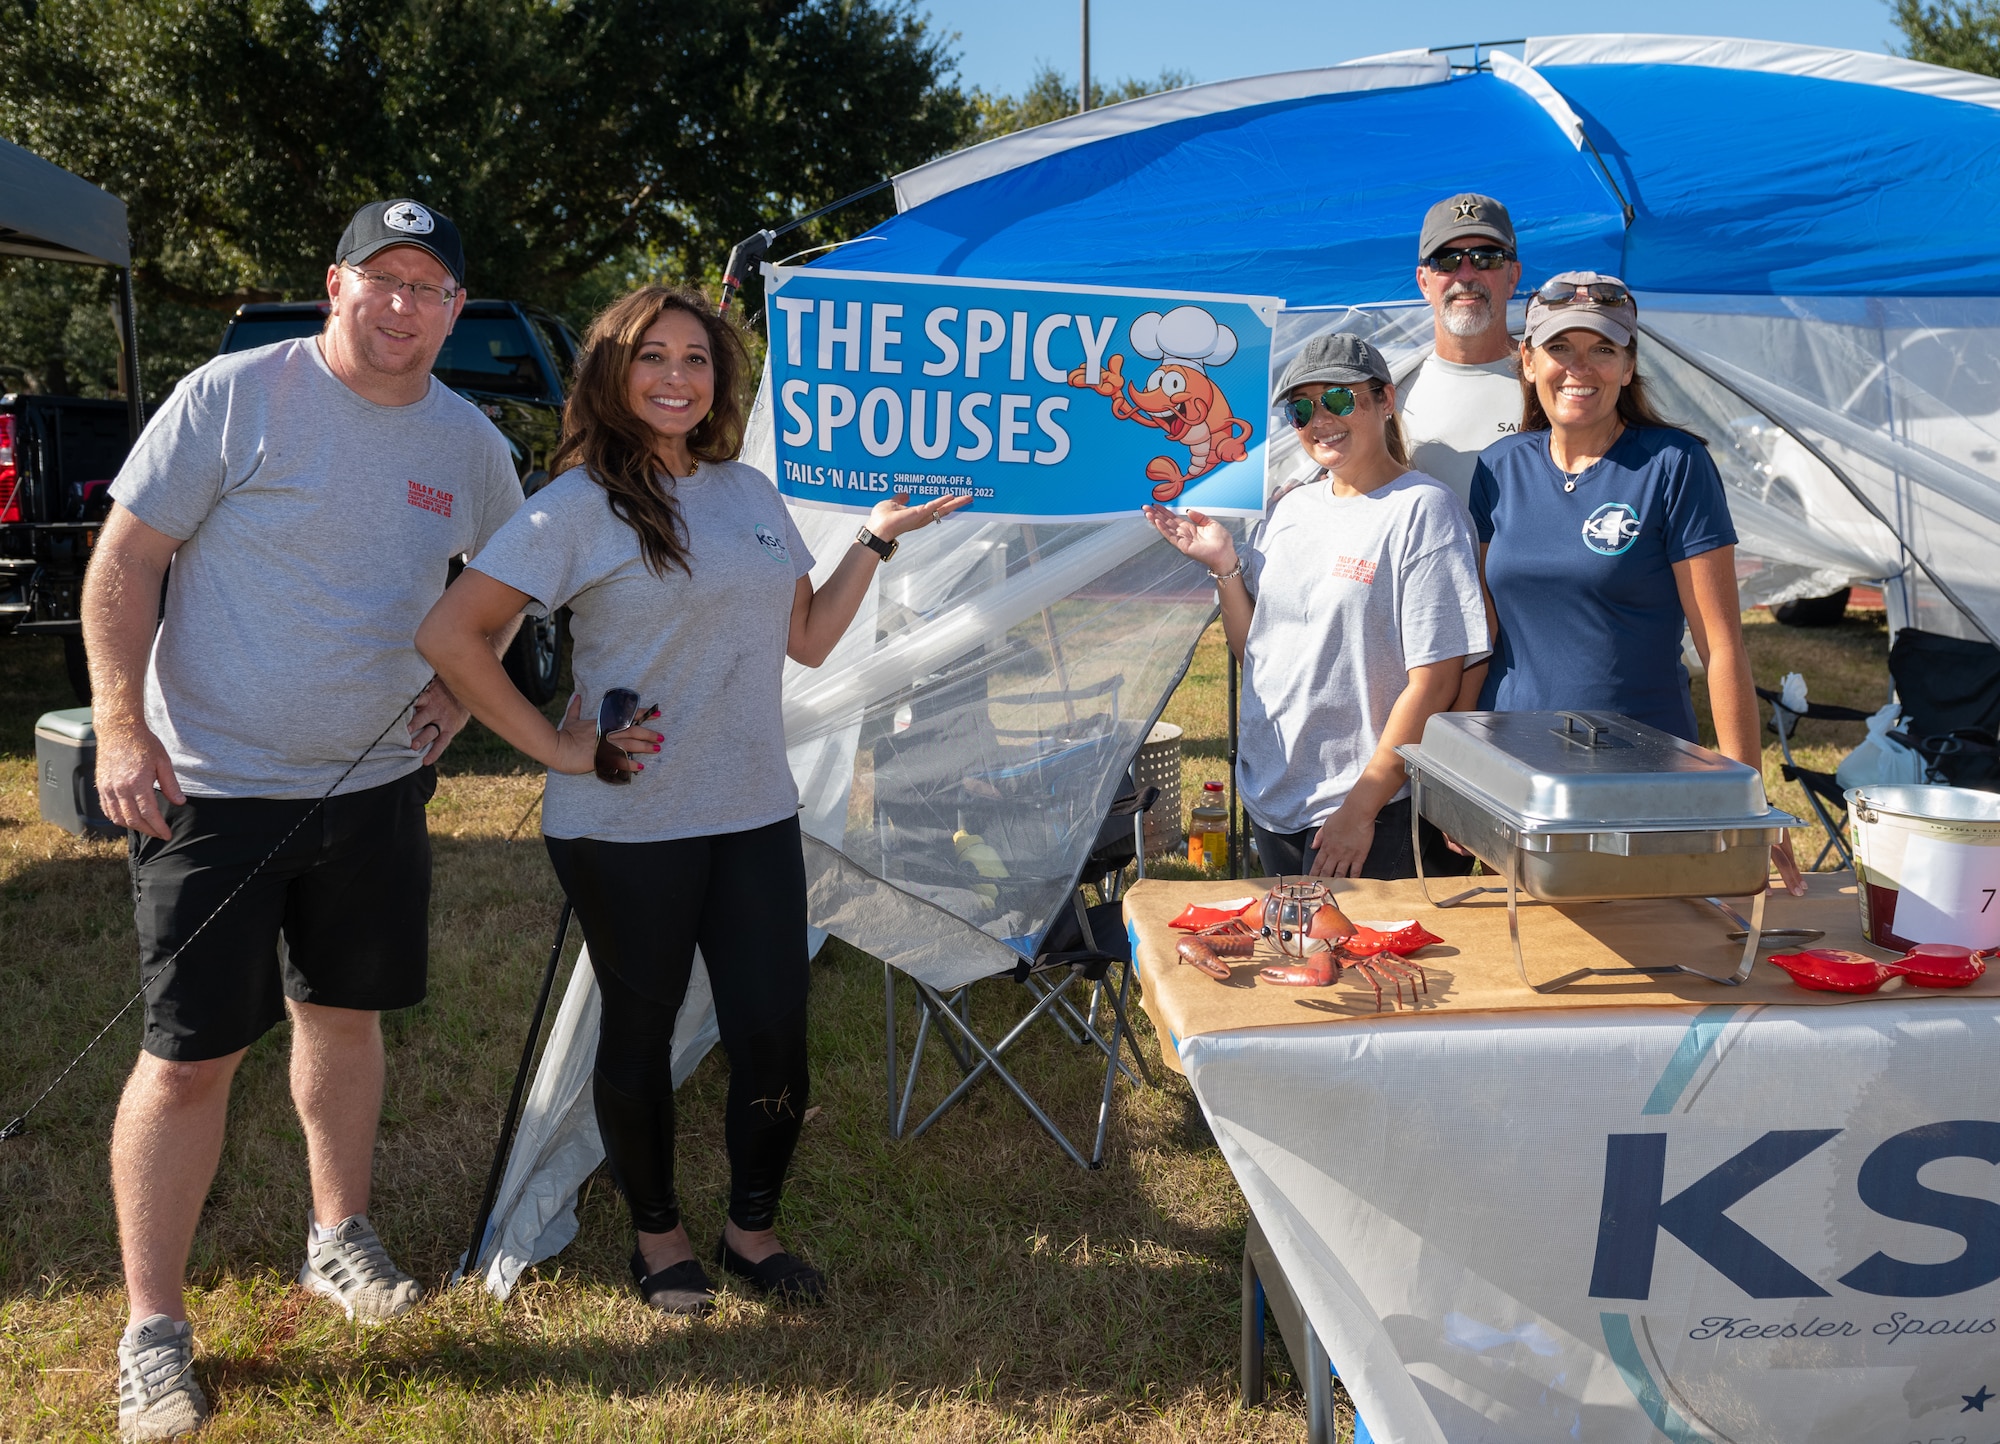 Members of the "Spicy Spouses" team pose for a photo during the Tails 'N Ales Annual Shrimp Cook-off outside the Bay Breeze Event Center at Keesler Air Force Base, Mississippi, Oct. 14, 2022. The 81st Force Support Squadron hosted event offered a variety of craft beers for tasting and many teams fighting for the ultimate best shrimp recipe. (U.S. Air Force photo by Andre' Askew)